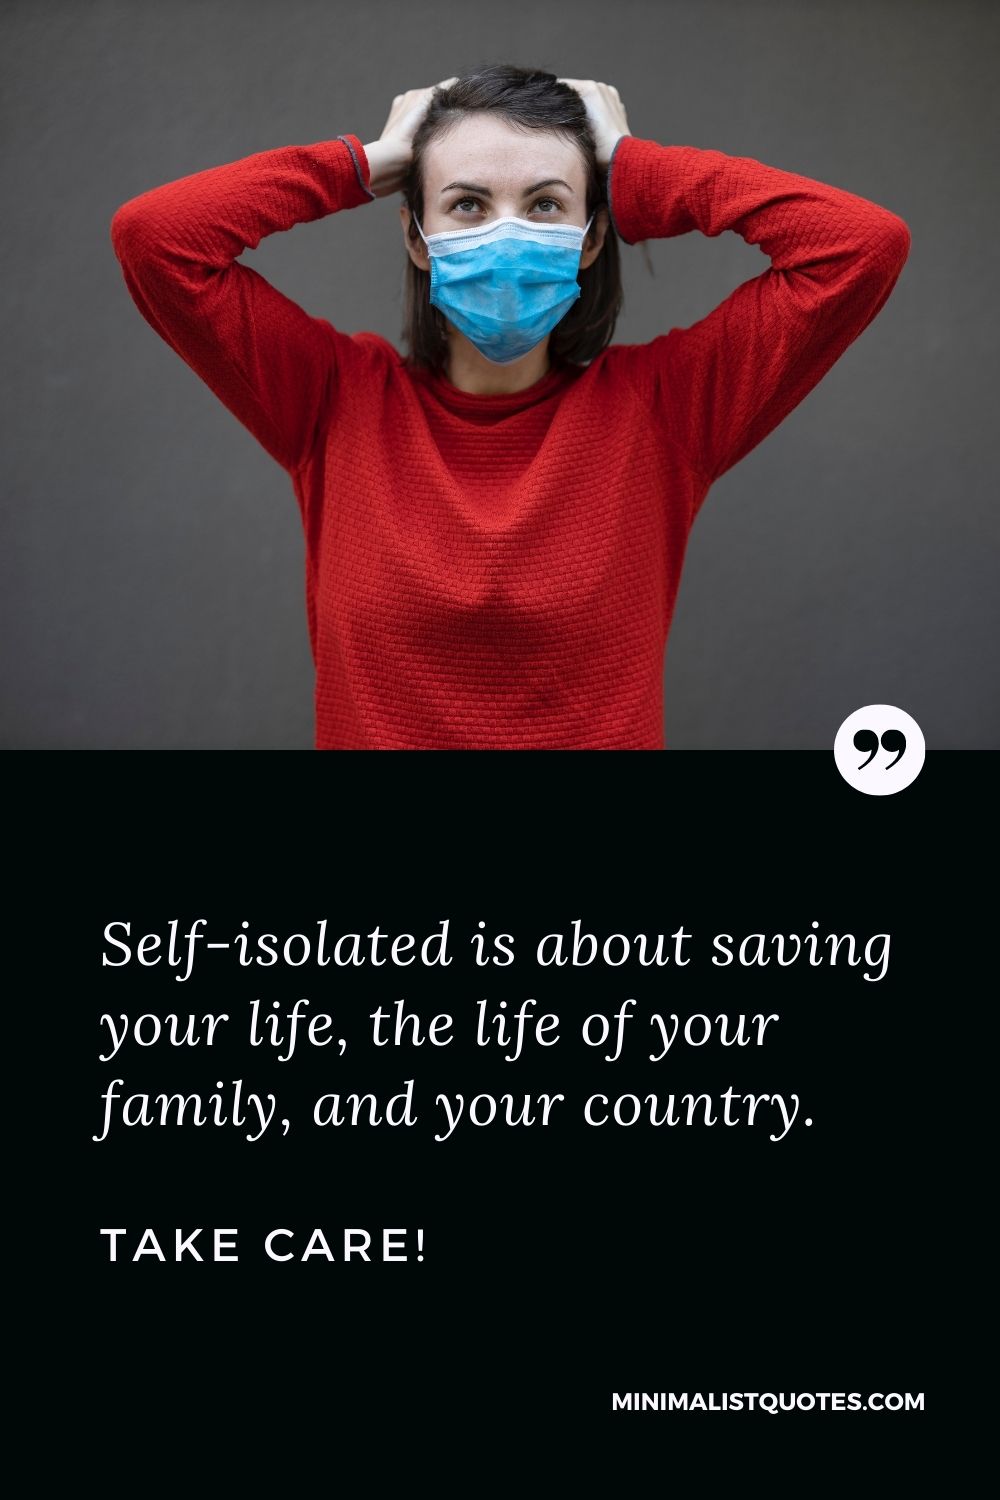 Quarantine Quote, Wish & Message With Image: Self-isolated is about saving your life, the life of your family, and your country. Take Care!